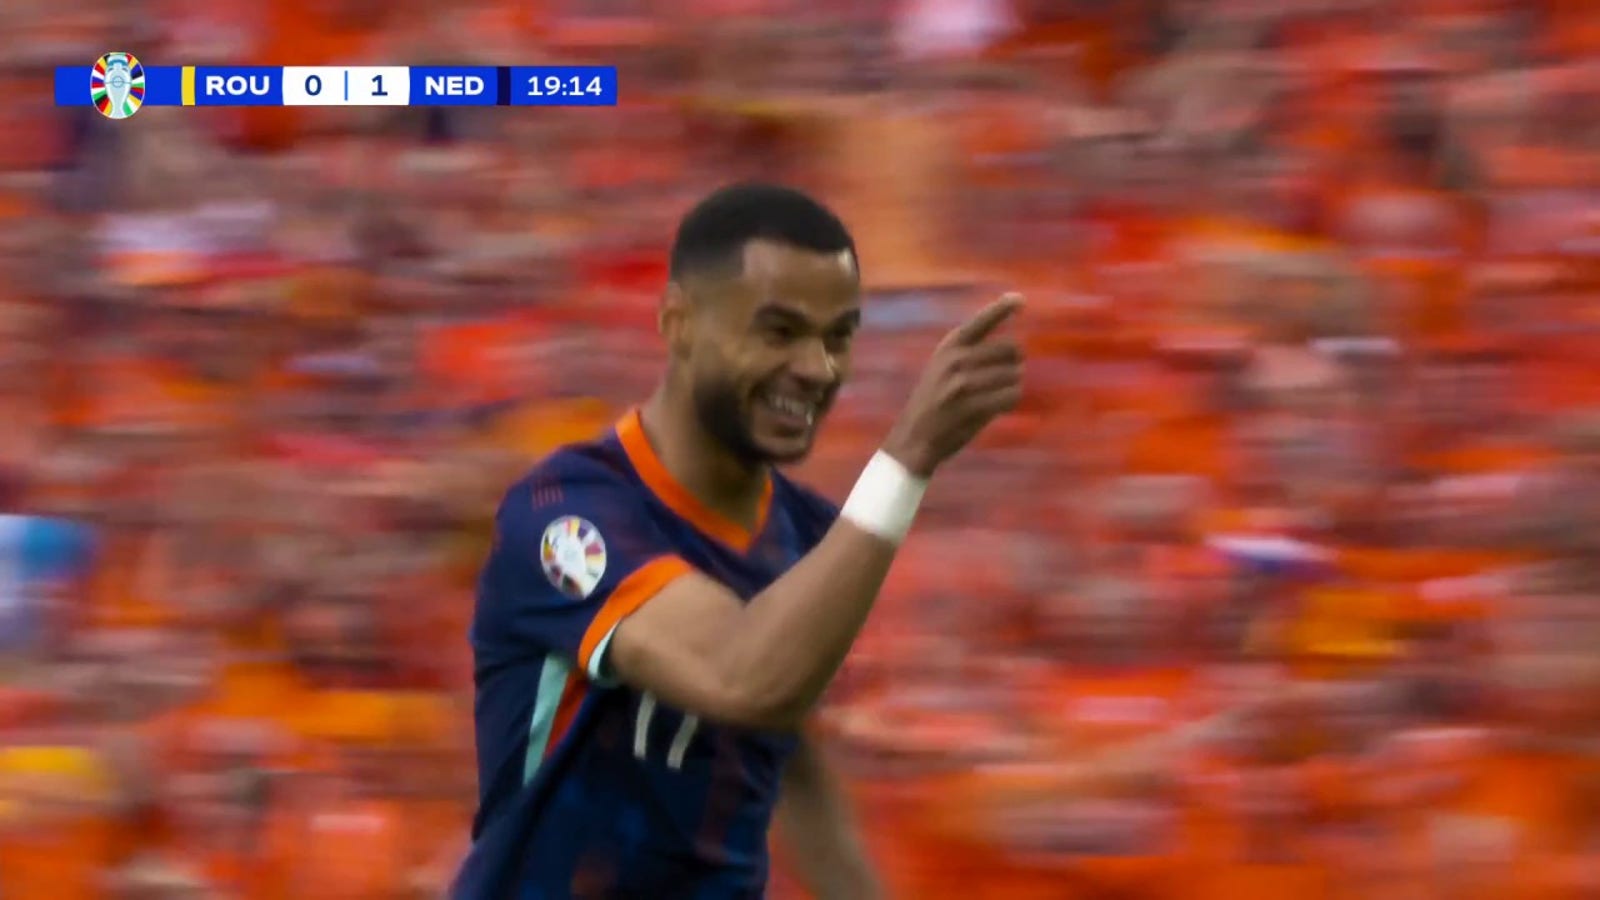 Cody Gakpo scores in 20' as the Netherlands take a 1-0 lead over Romania